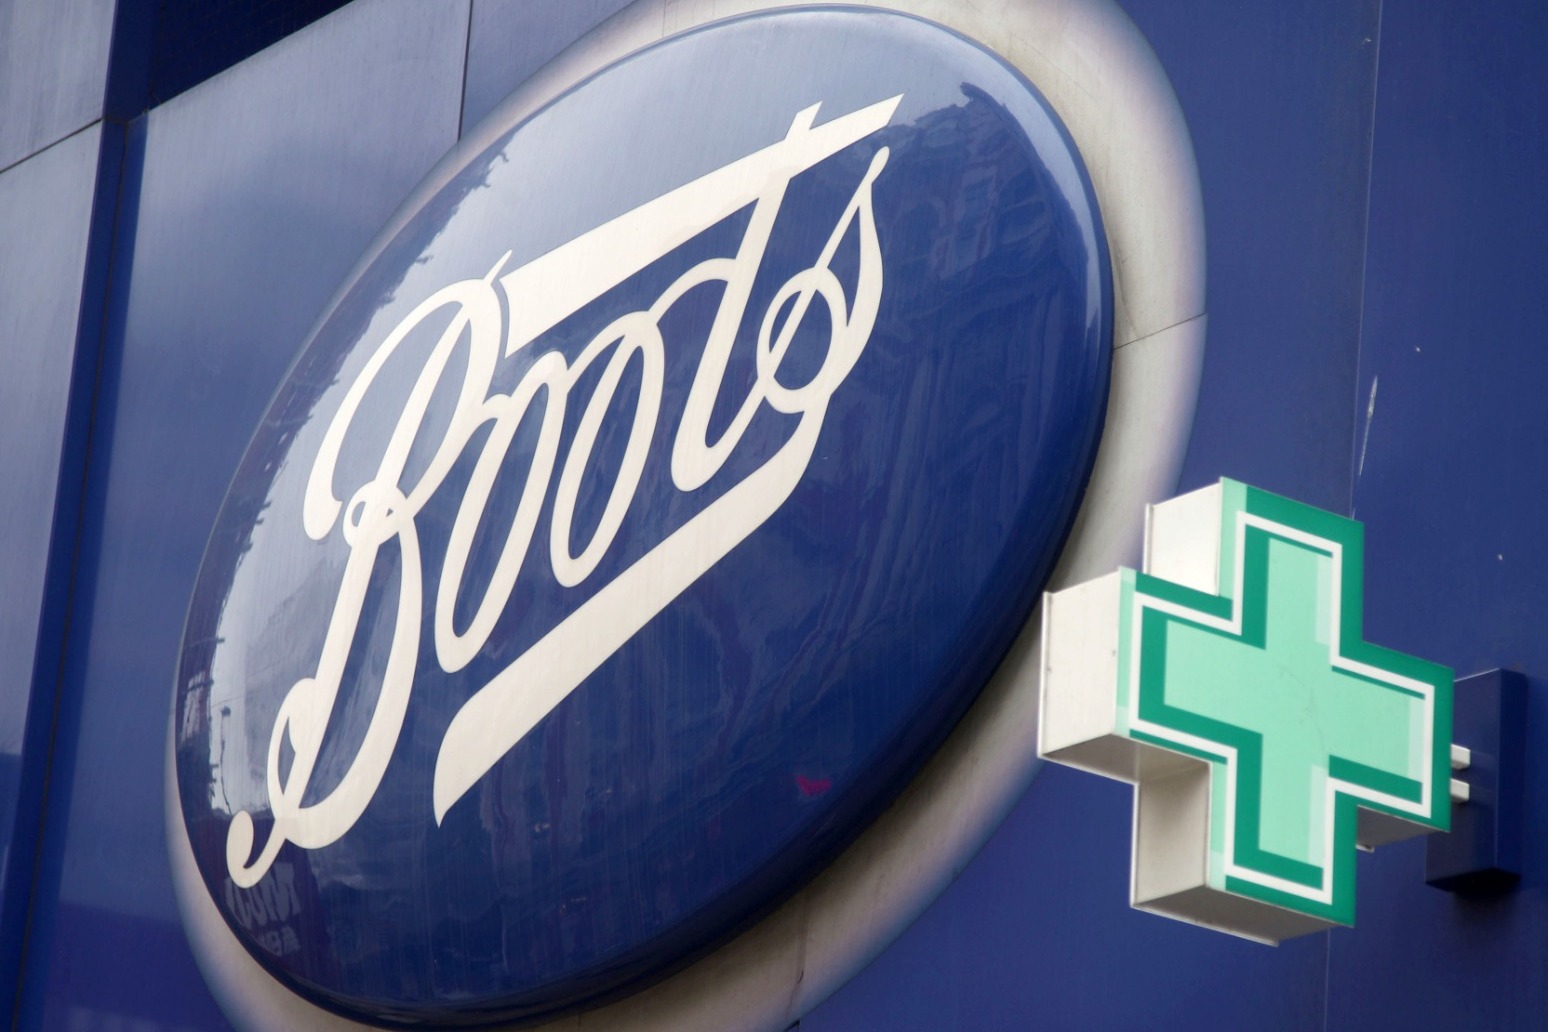 Boots cheers ‘very strong Christmas’ as high street stores buoy sales 